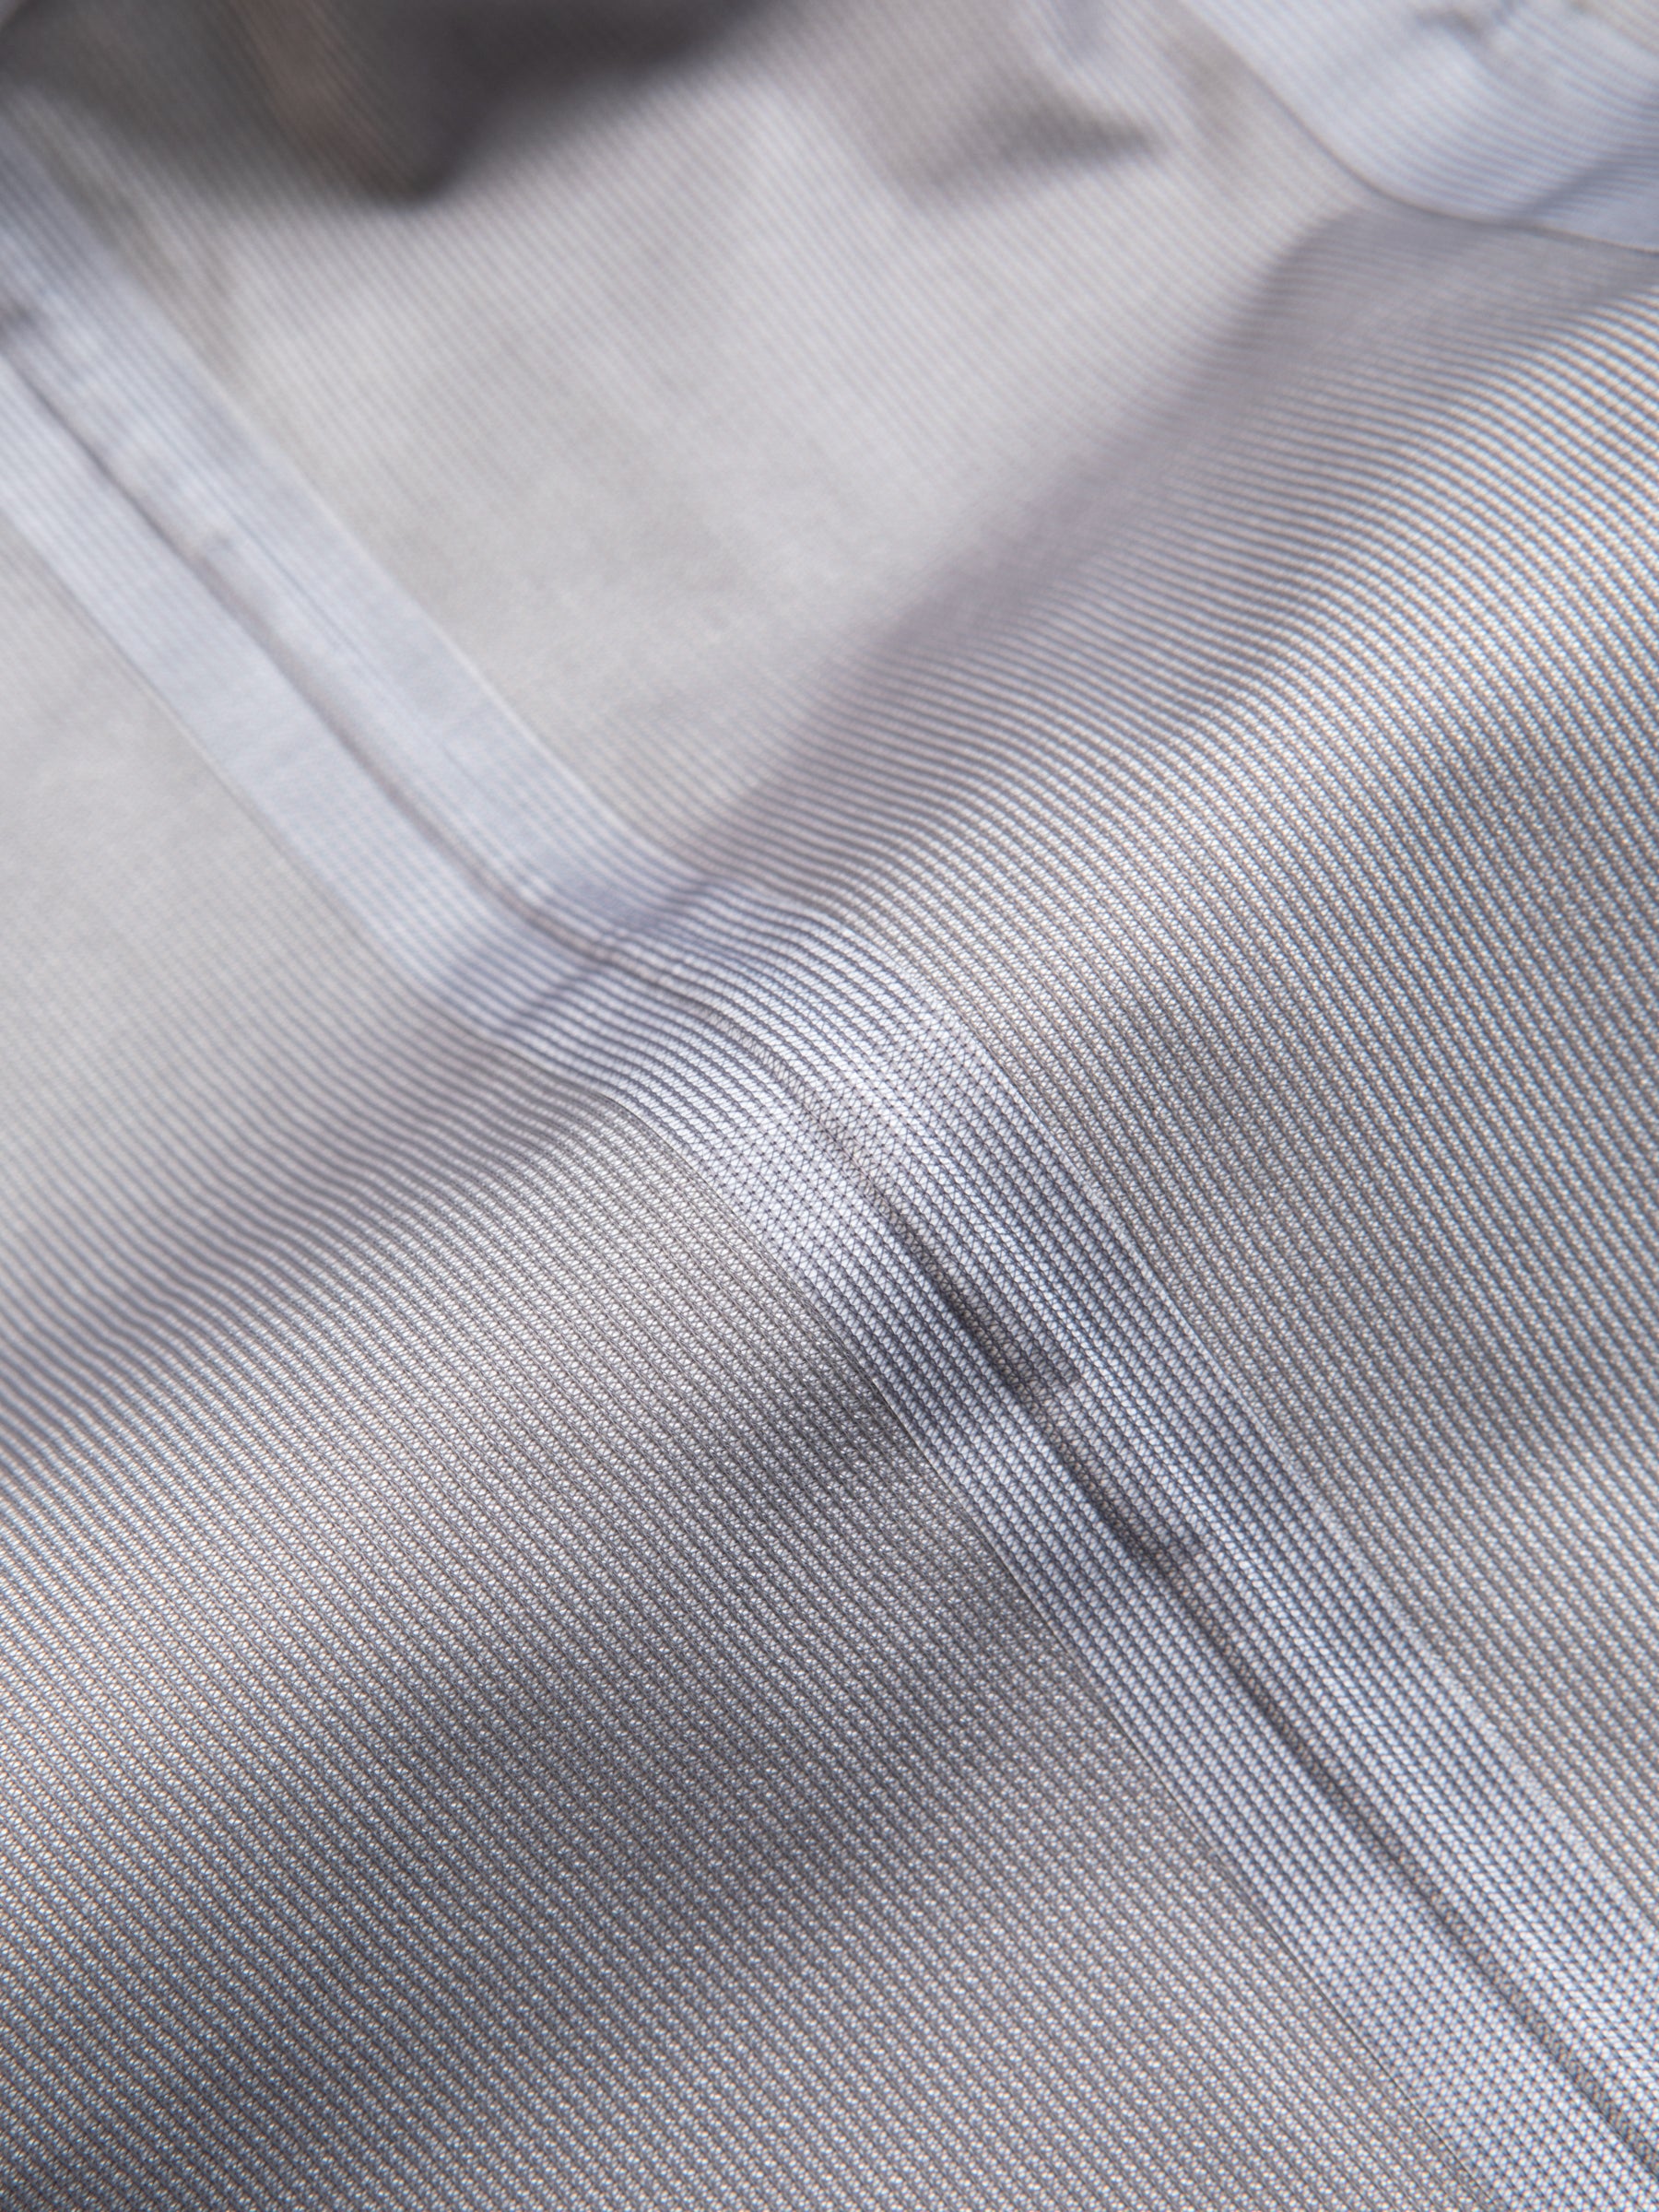 The technical inside fabric of a waterproof jacket, with a fully taped seam.